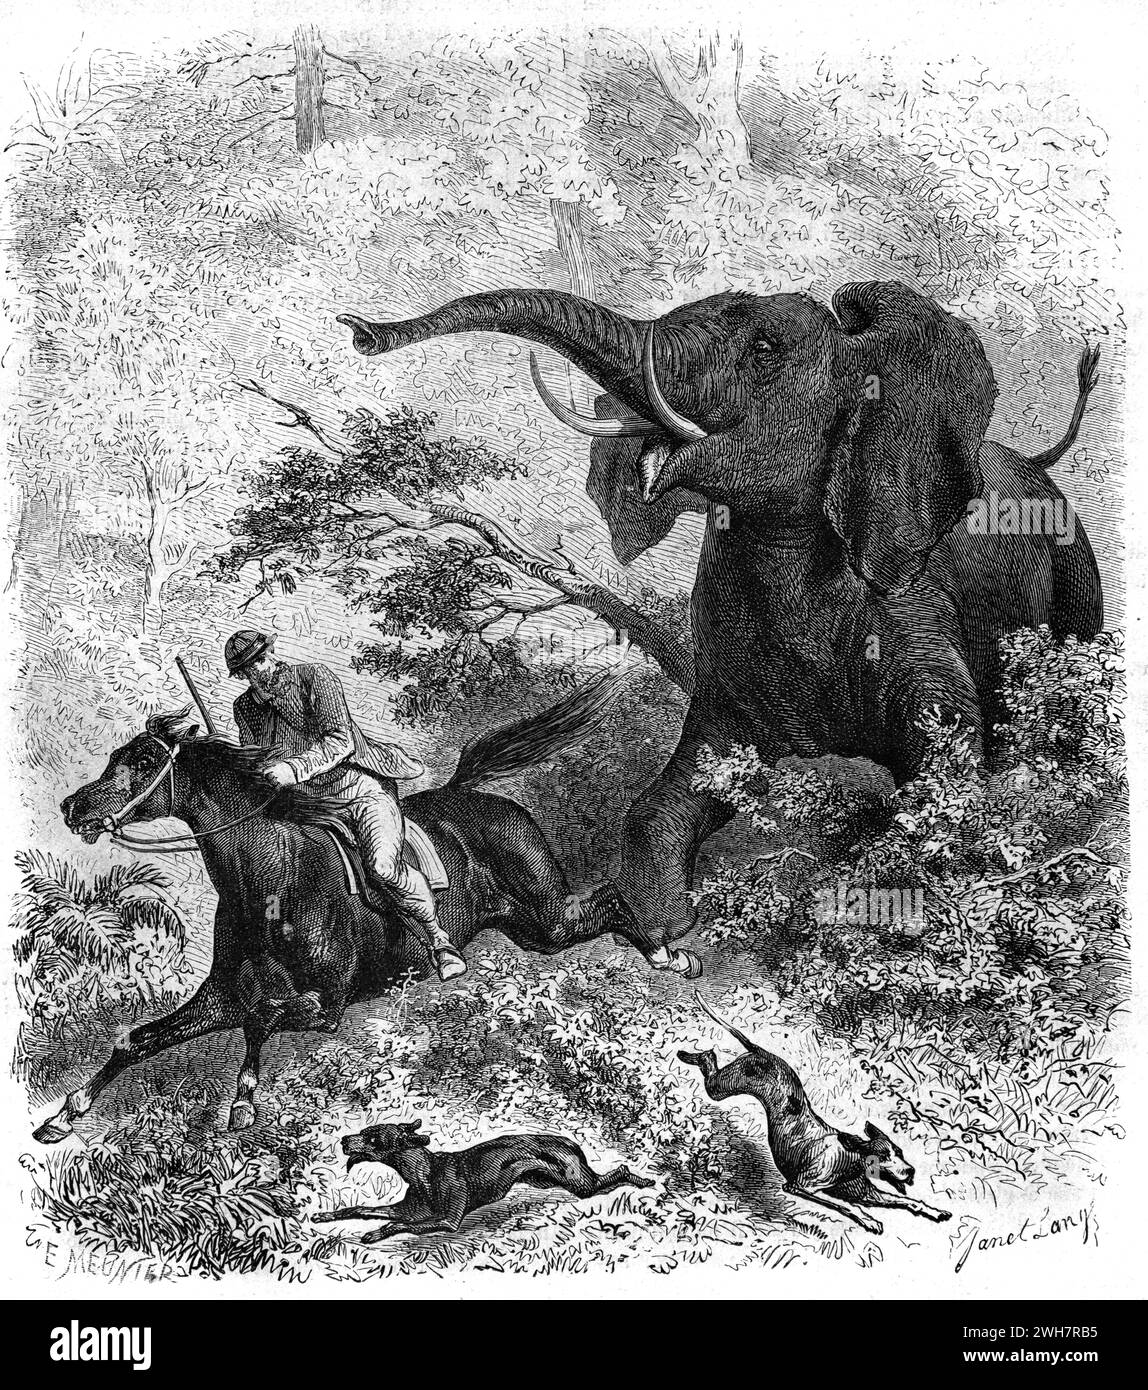 William Charles Baldwin (1826-1903) a British or English Big-Game Hunter, Hunting African Elephant or Elephants on Horseback in Africa. Vintage or Historic Engraving or Illustration 1863 Stock Photo